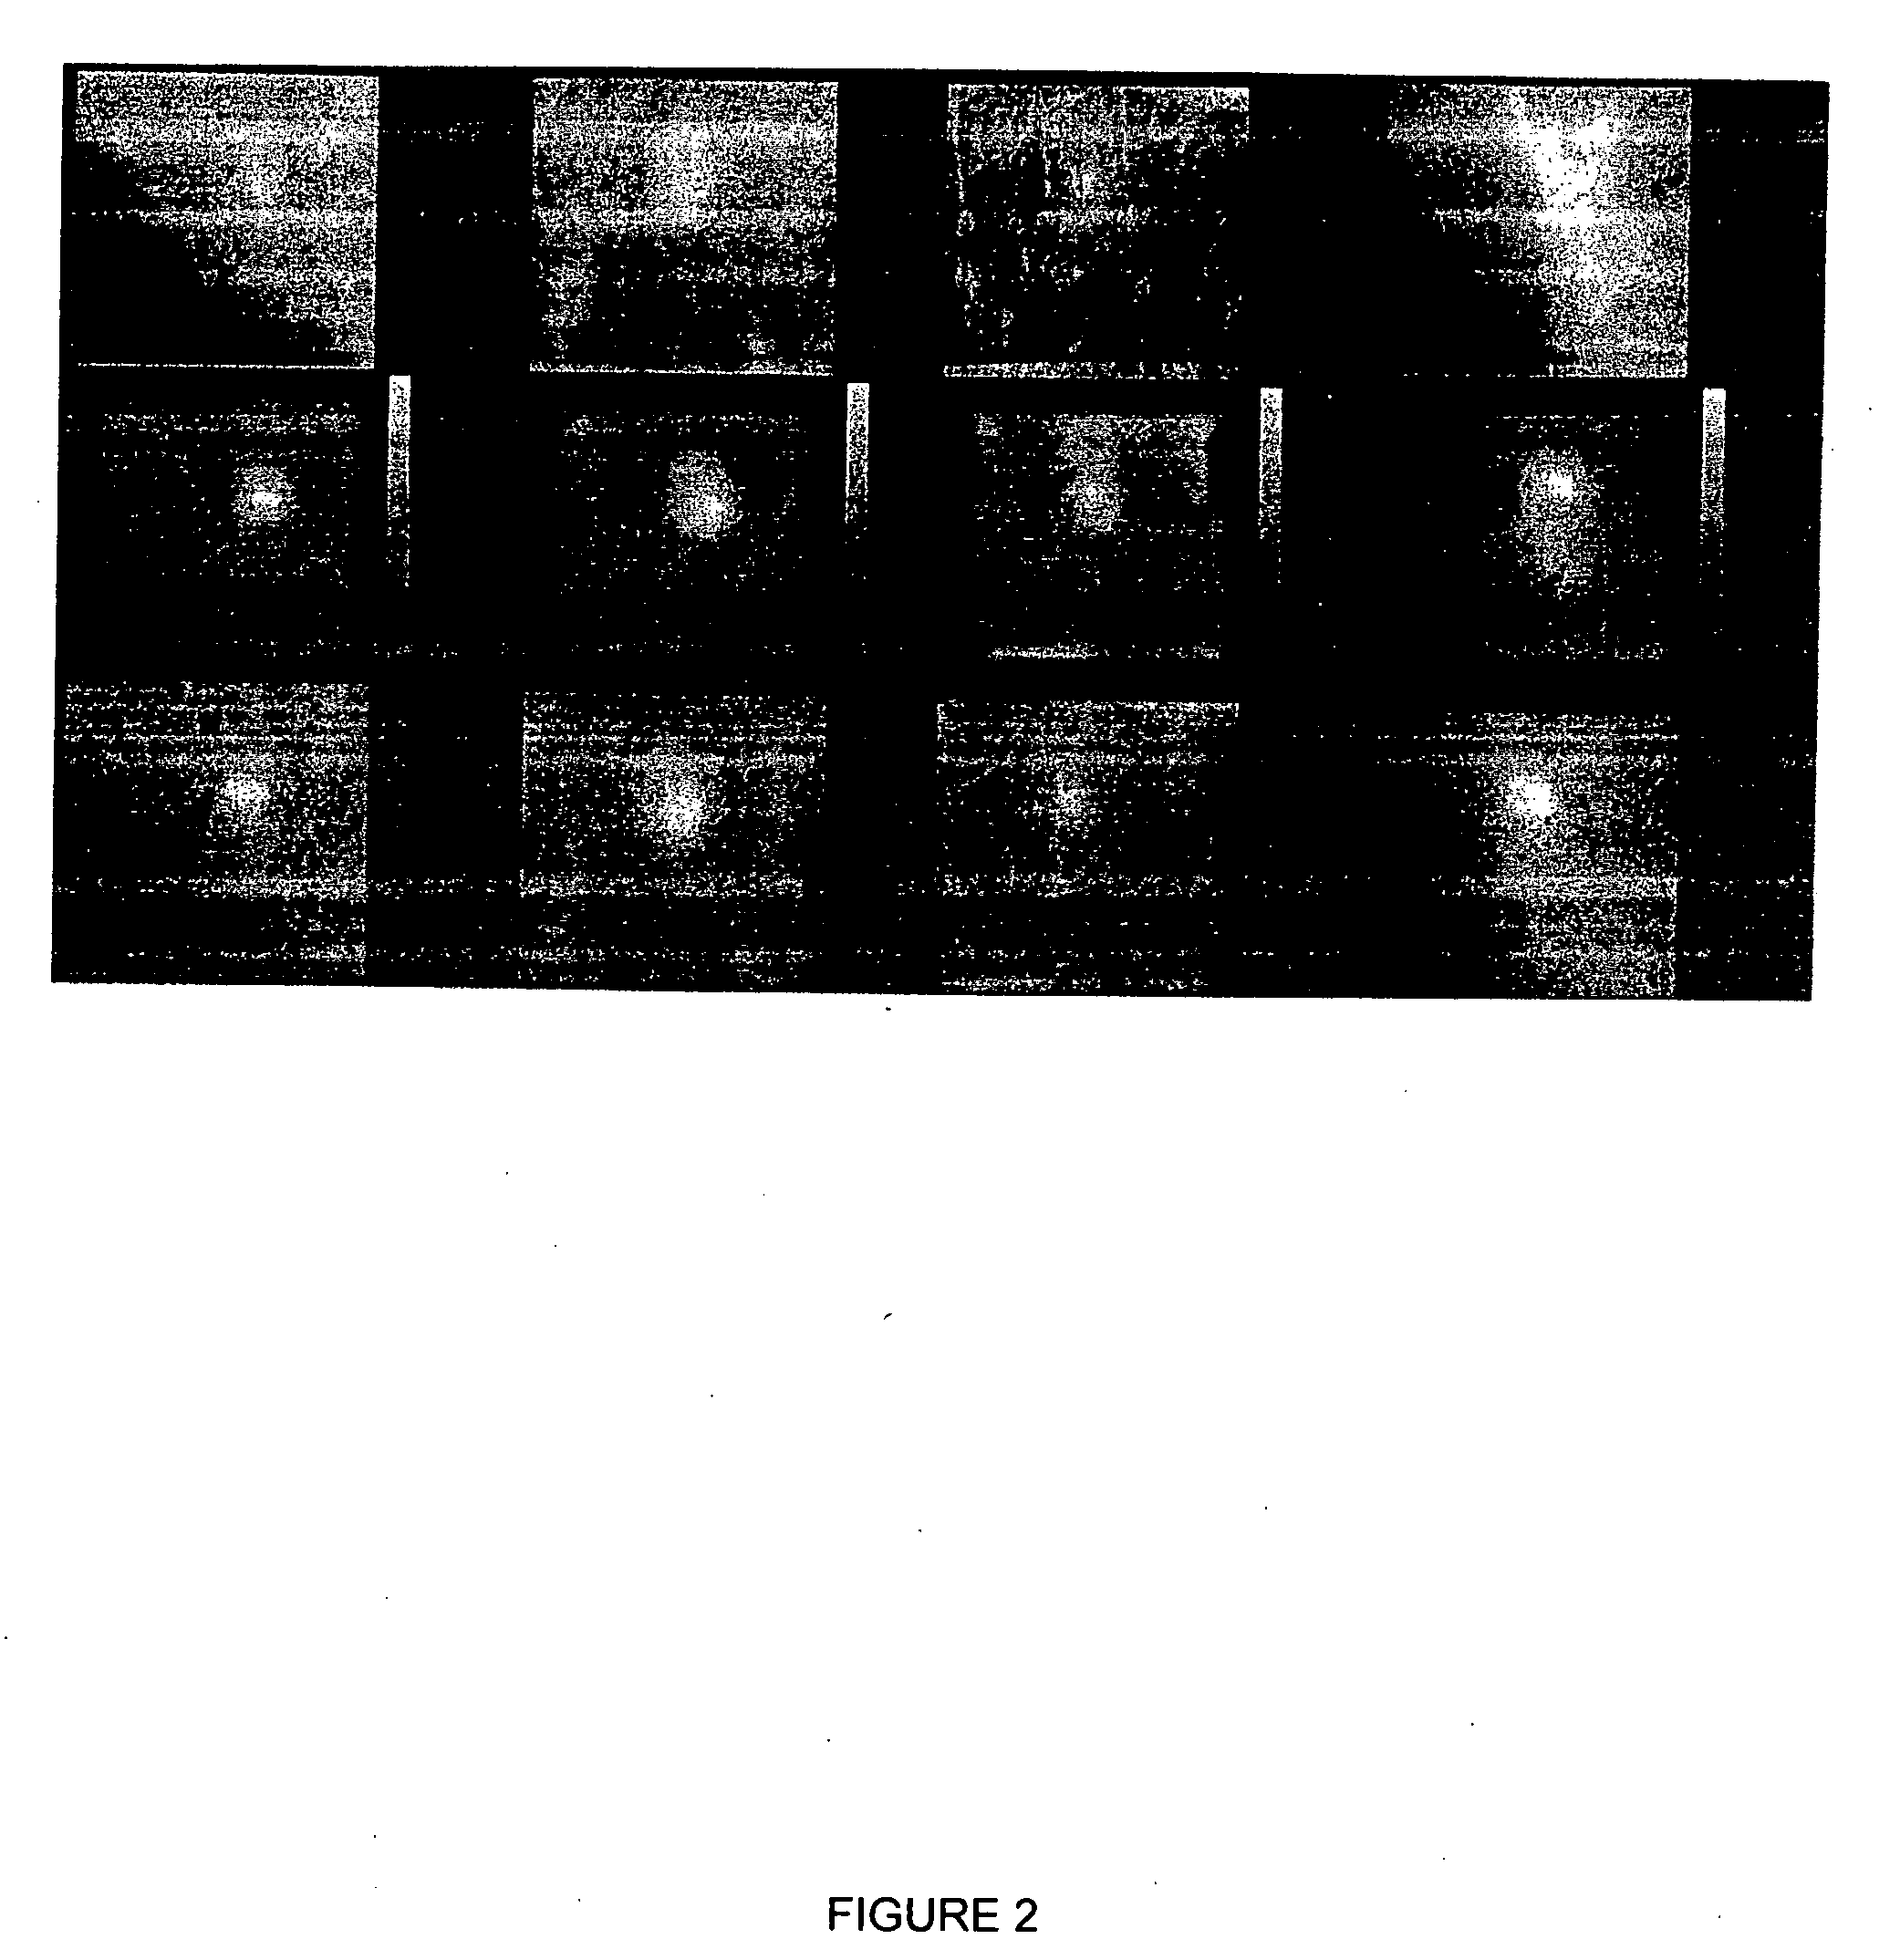 Method and apparatus for combined gamma/x-ray imaging in stereotactic biopsy